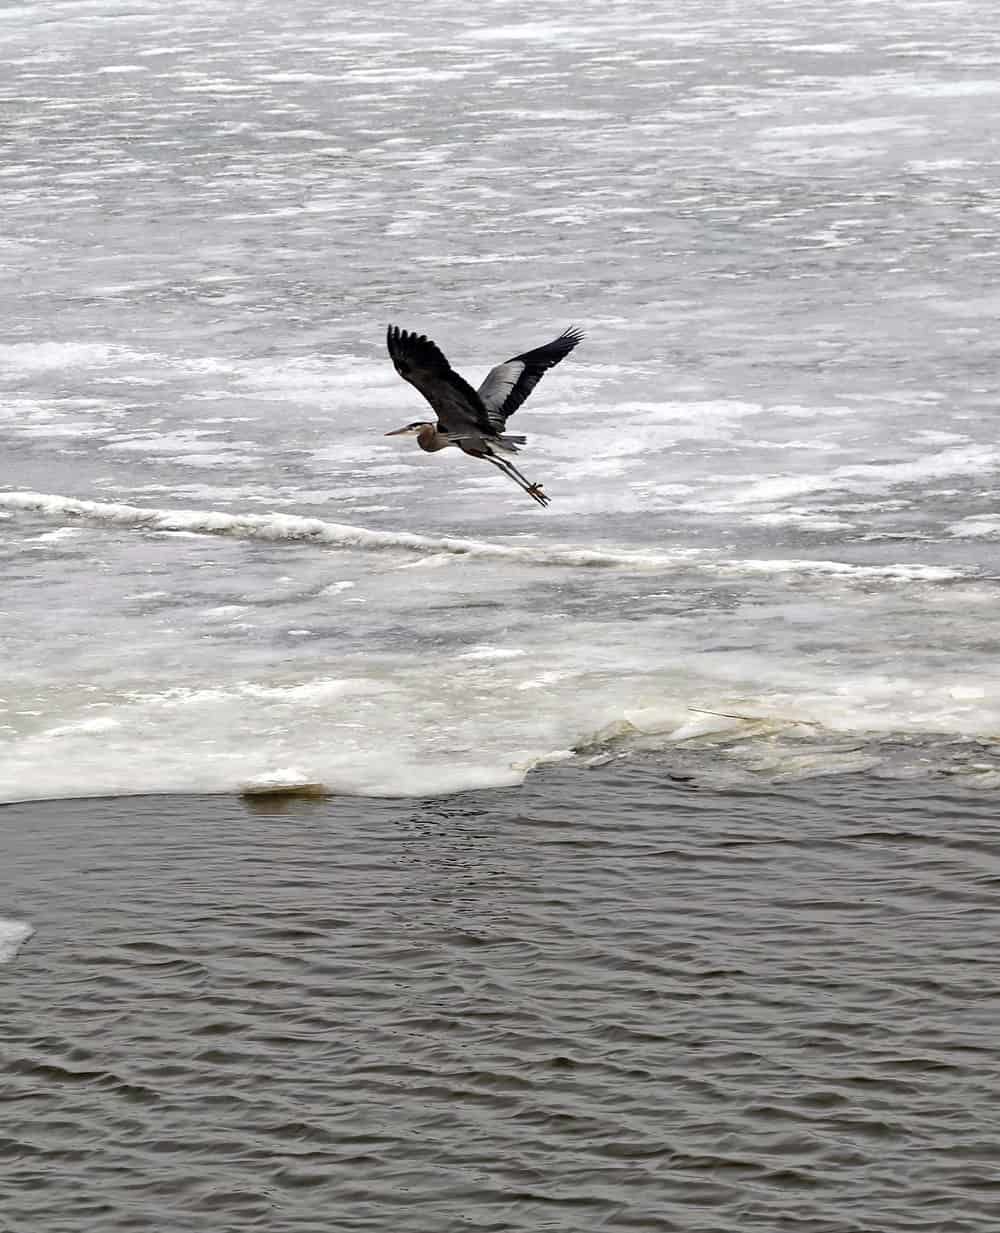  A blue Heron rises from an ice floe at the  Sandusky's  approach.  Photo by Wendy Mitman Clarke  